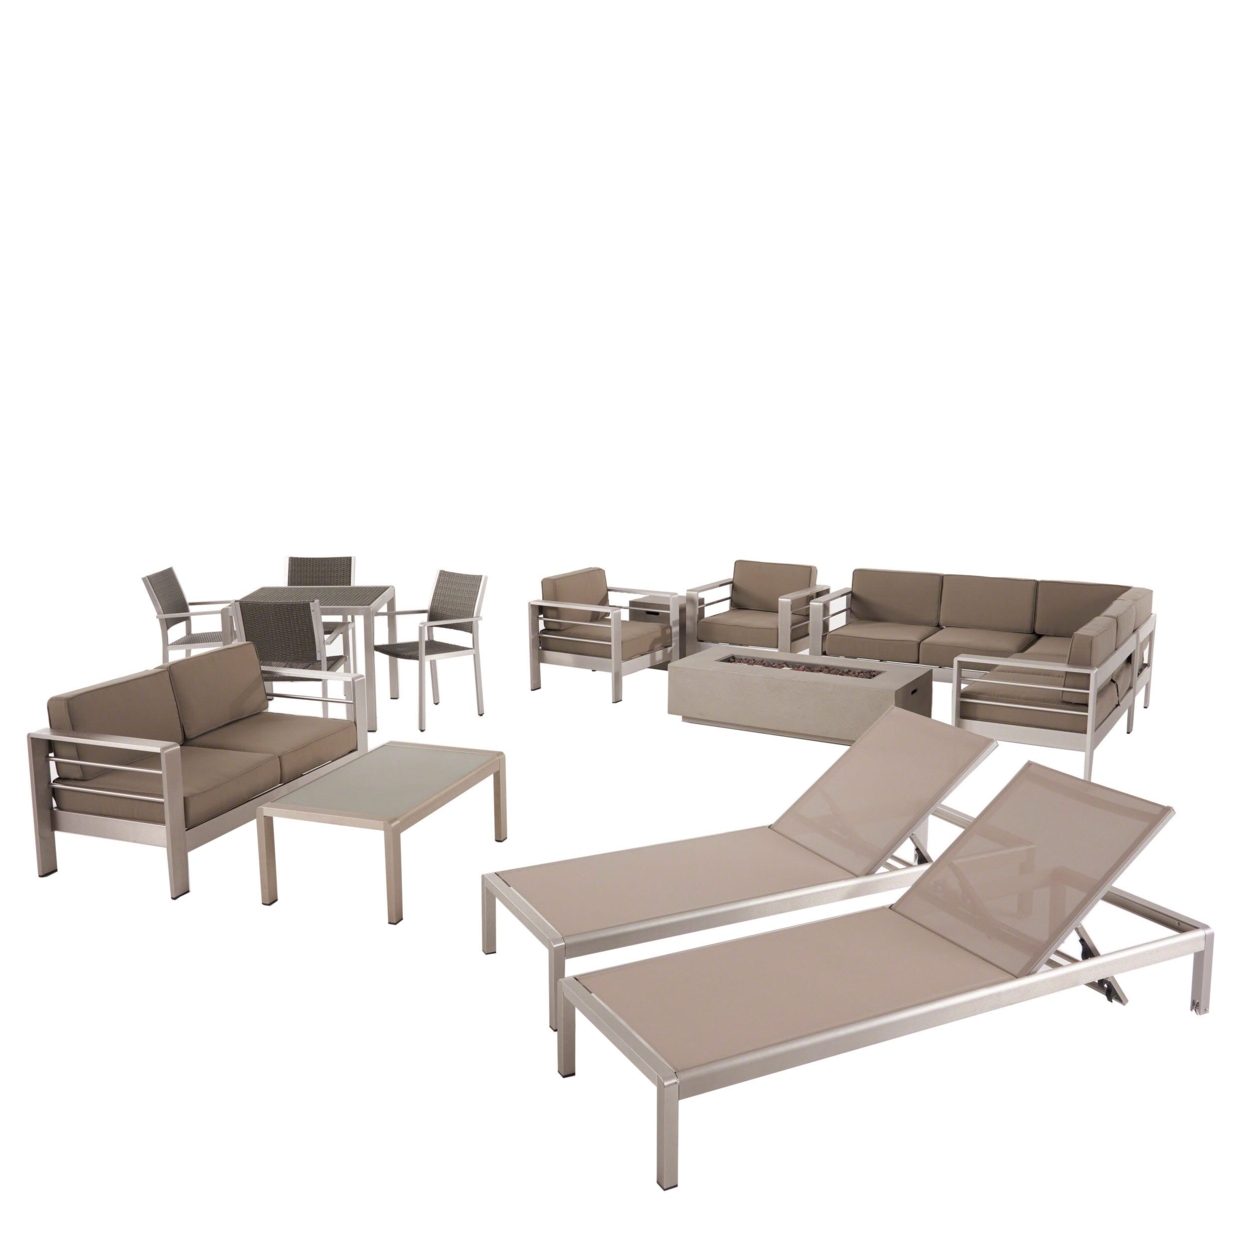 Cherie Outdoor 16 Piece Aluminum Estate Collection With Cushions And Fire Pit - Light Gray